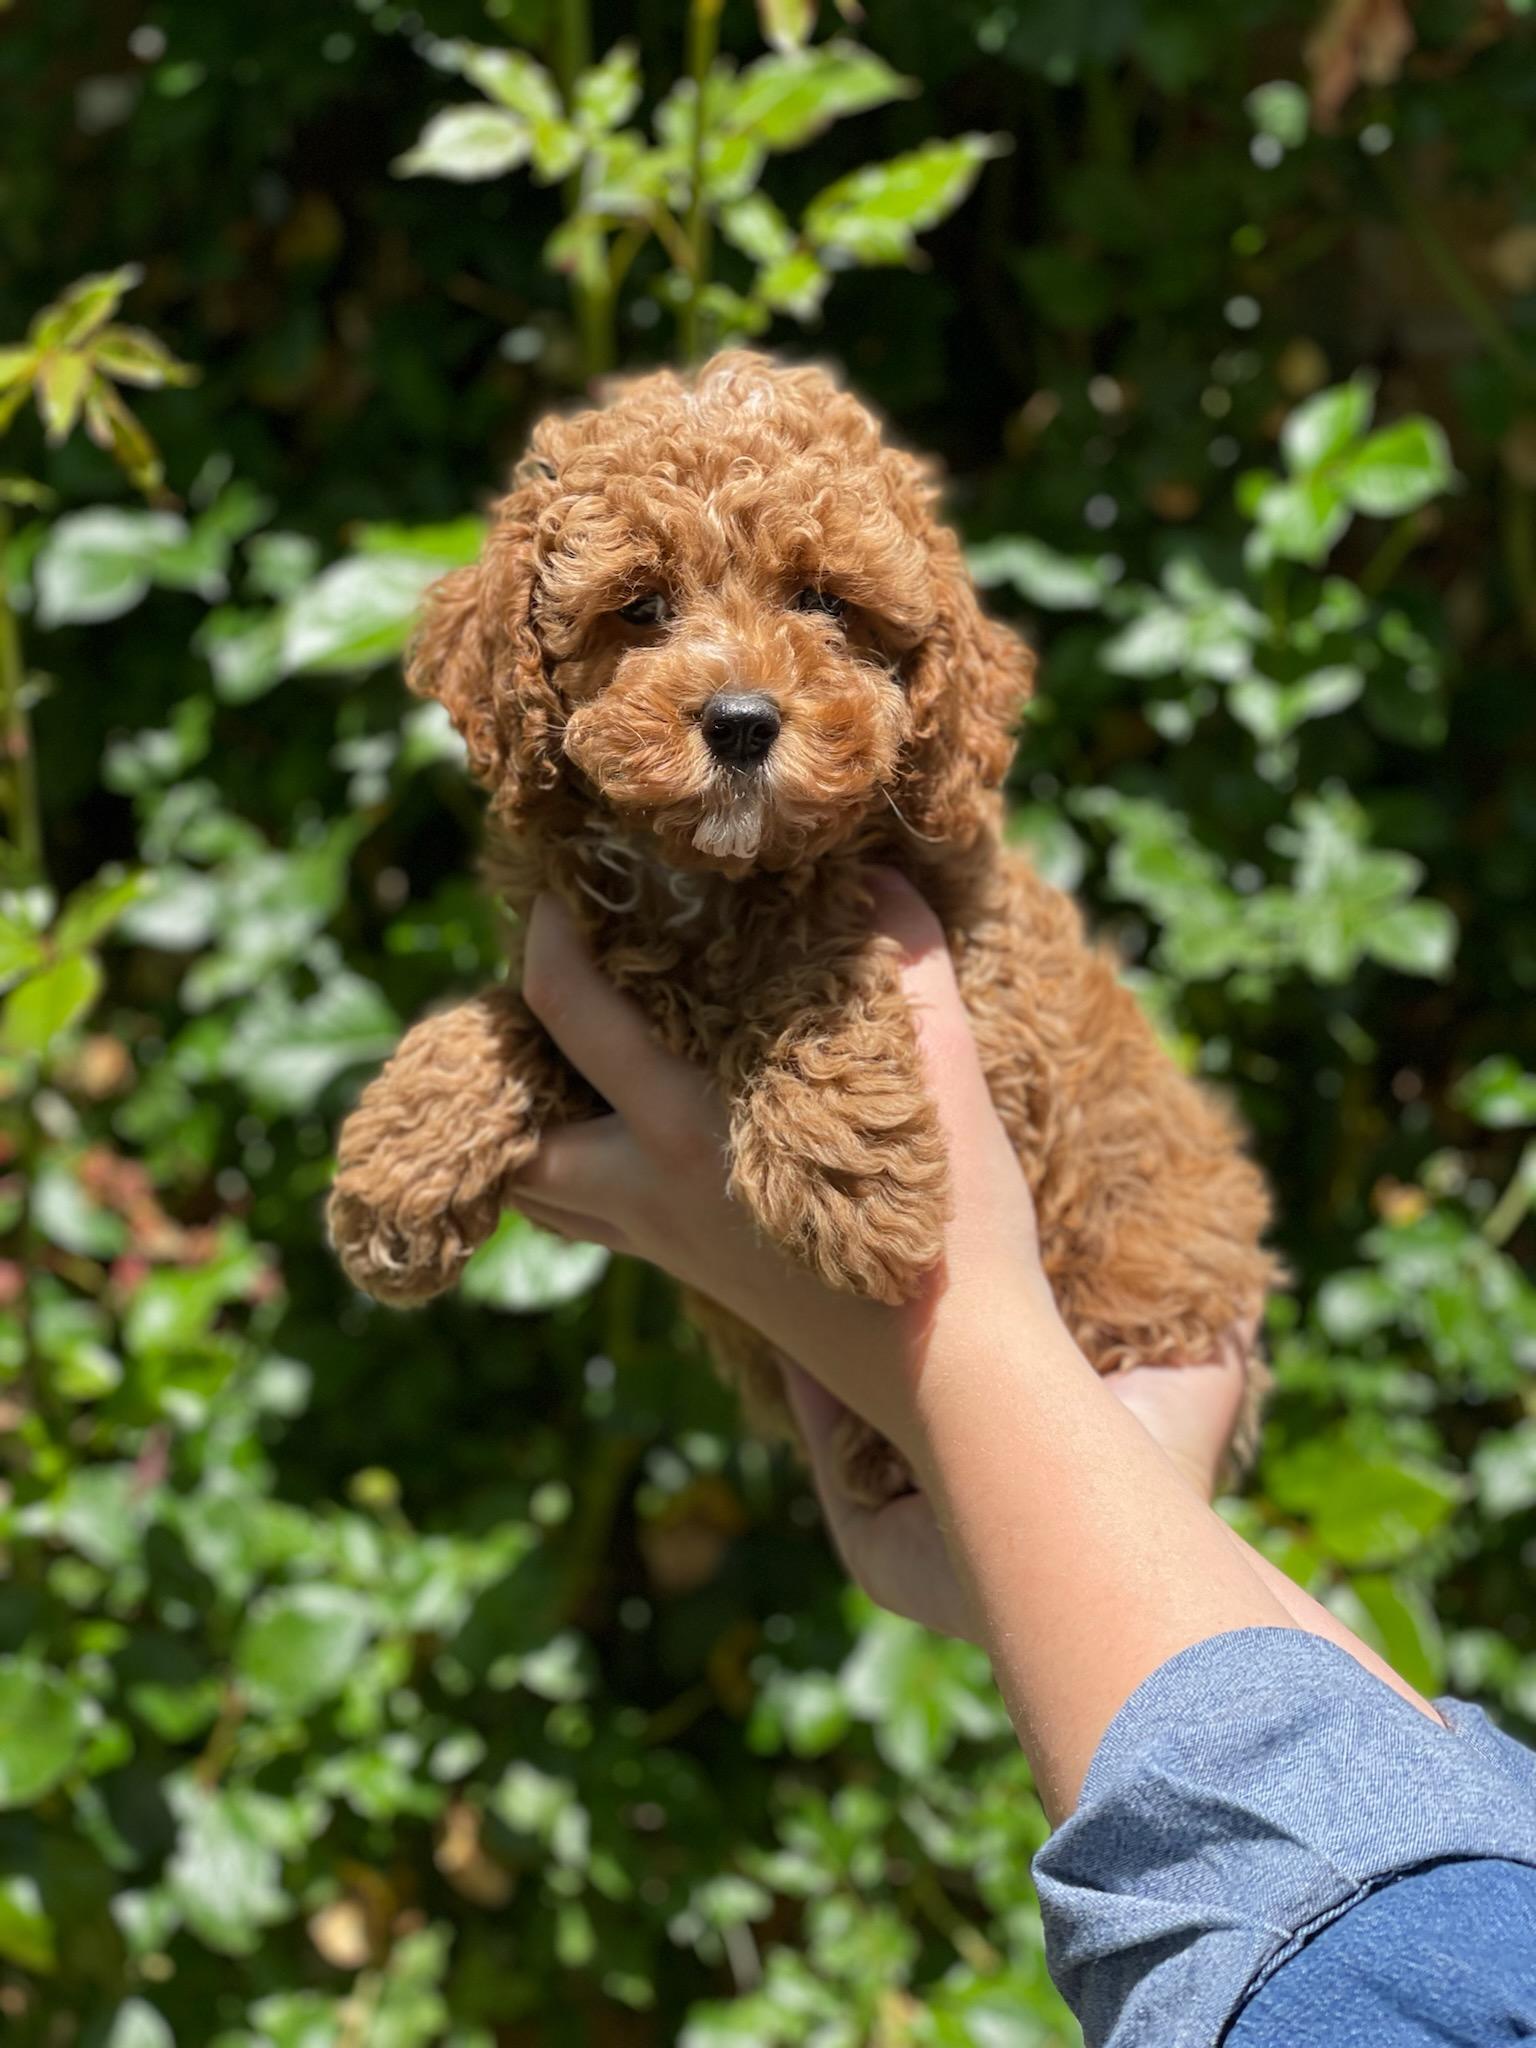 A person holds a precious brown puppy, its fur soft and its eyes bright with curiosity.